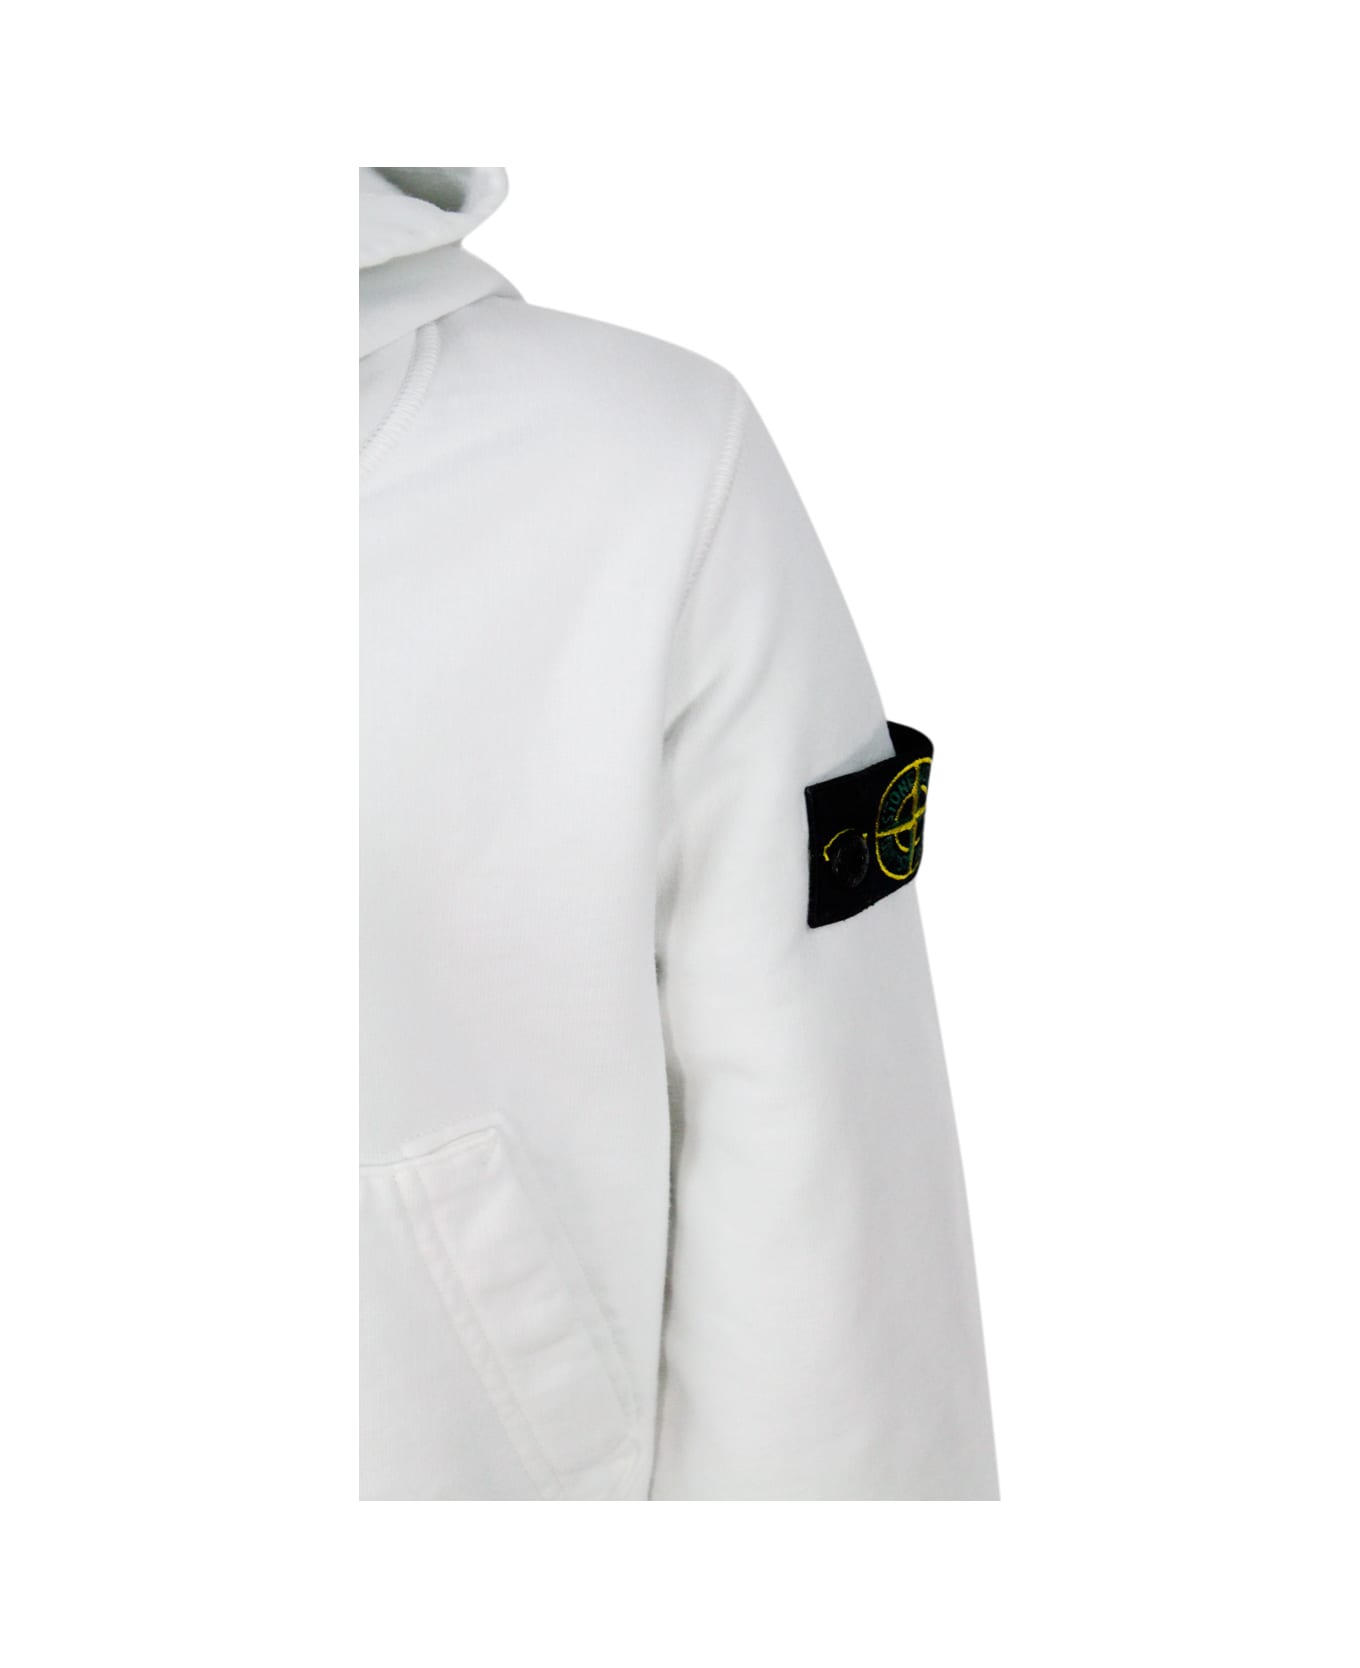 Stone Island Rocky Hooded Sweatshirt With Long Sleeves In Stretch Cotton With Badge On The Left Sleeve - White